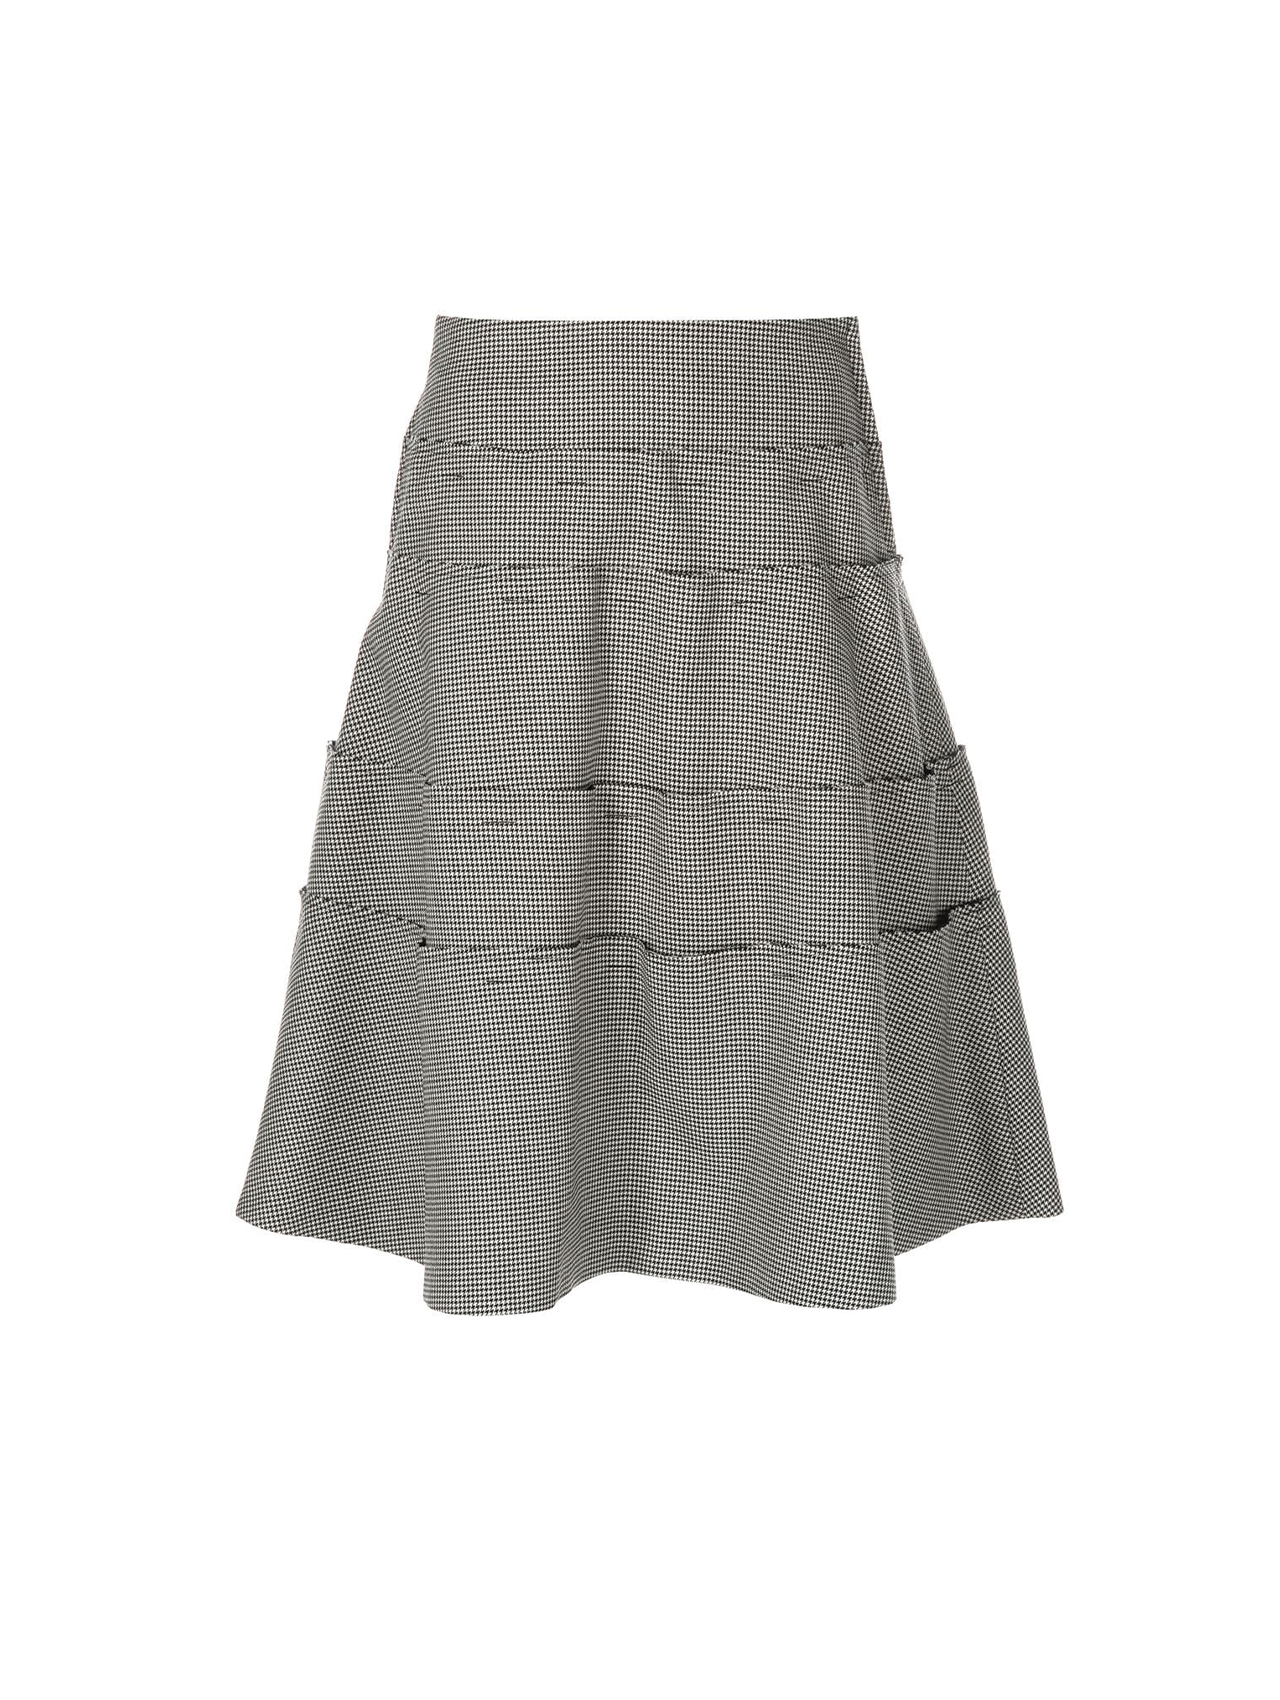 CDG CDG Houndstooth Tiered Skirt